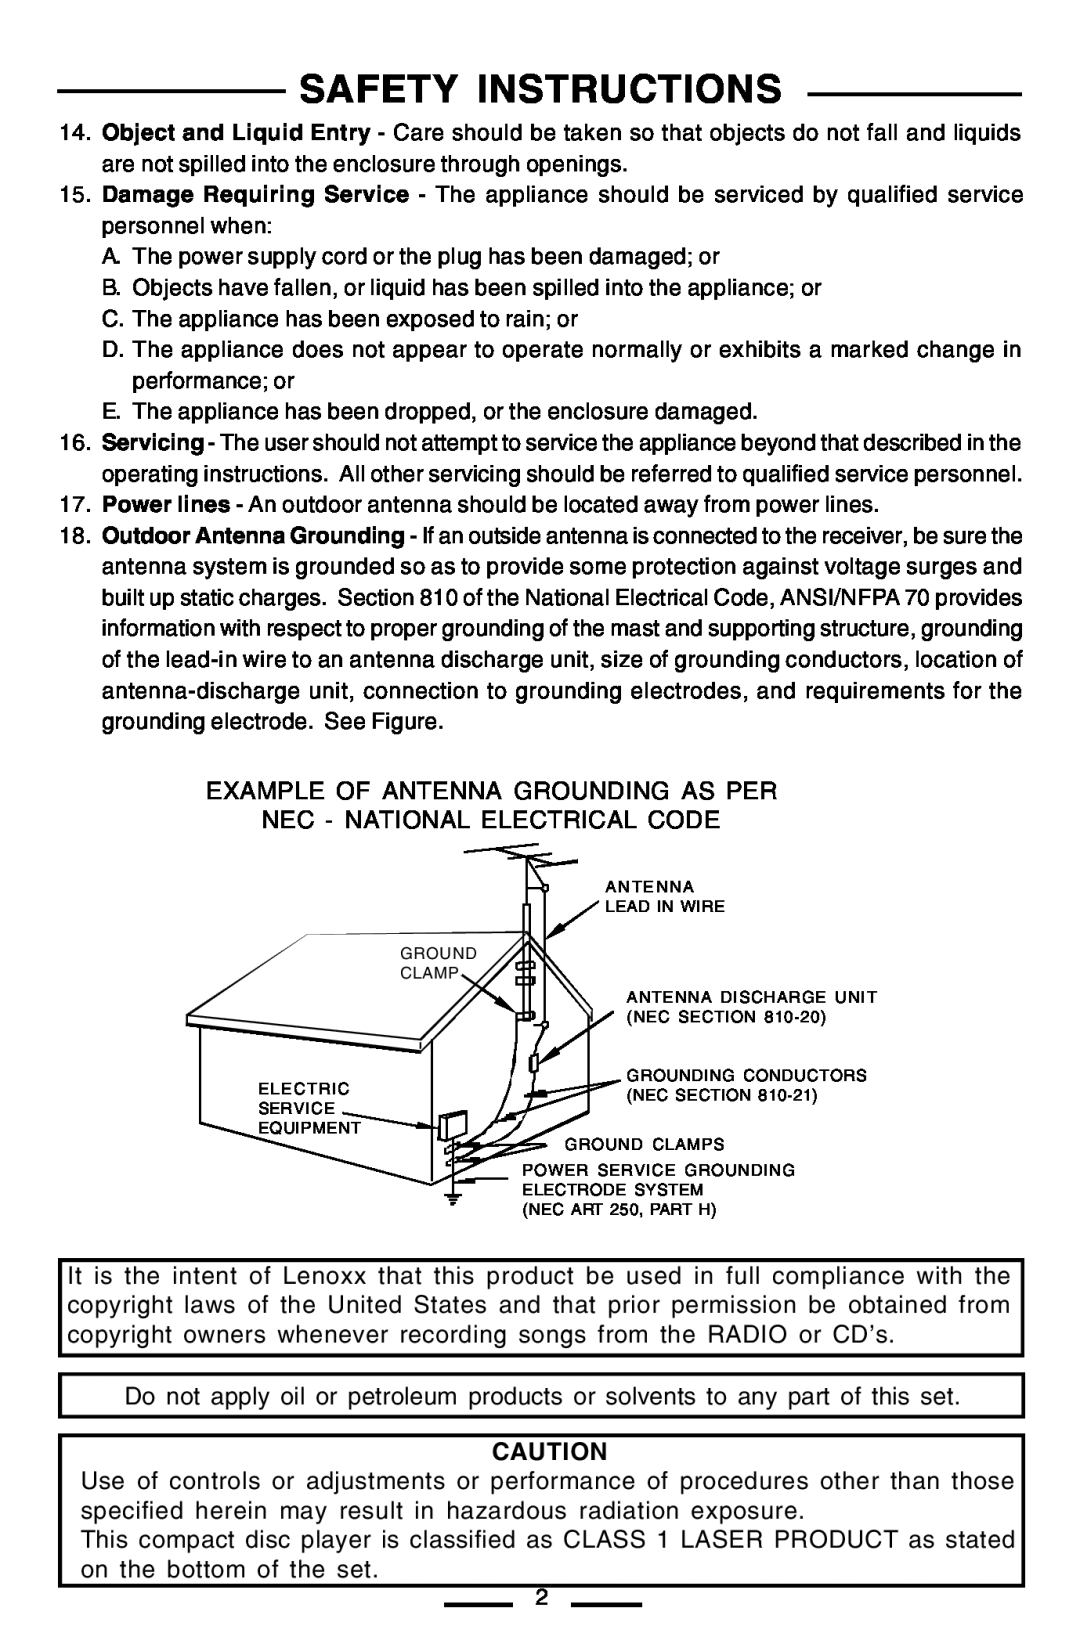 Lenoxx Electronics CD-102 operating instructions Safety Instructions, Example Of Antenna Grounding As Per 